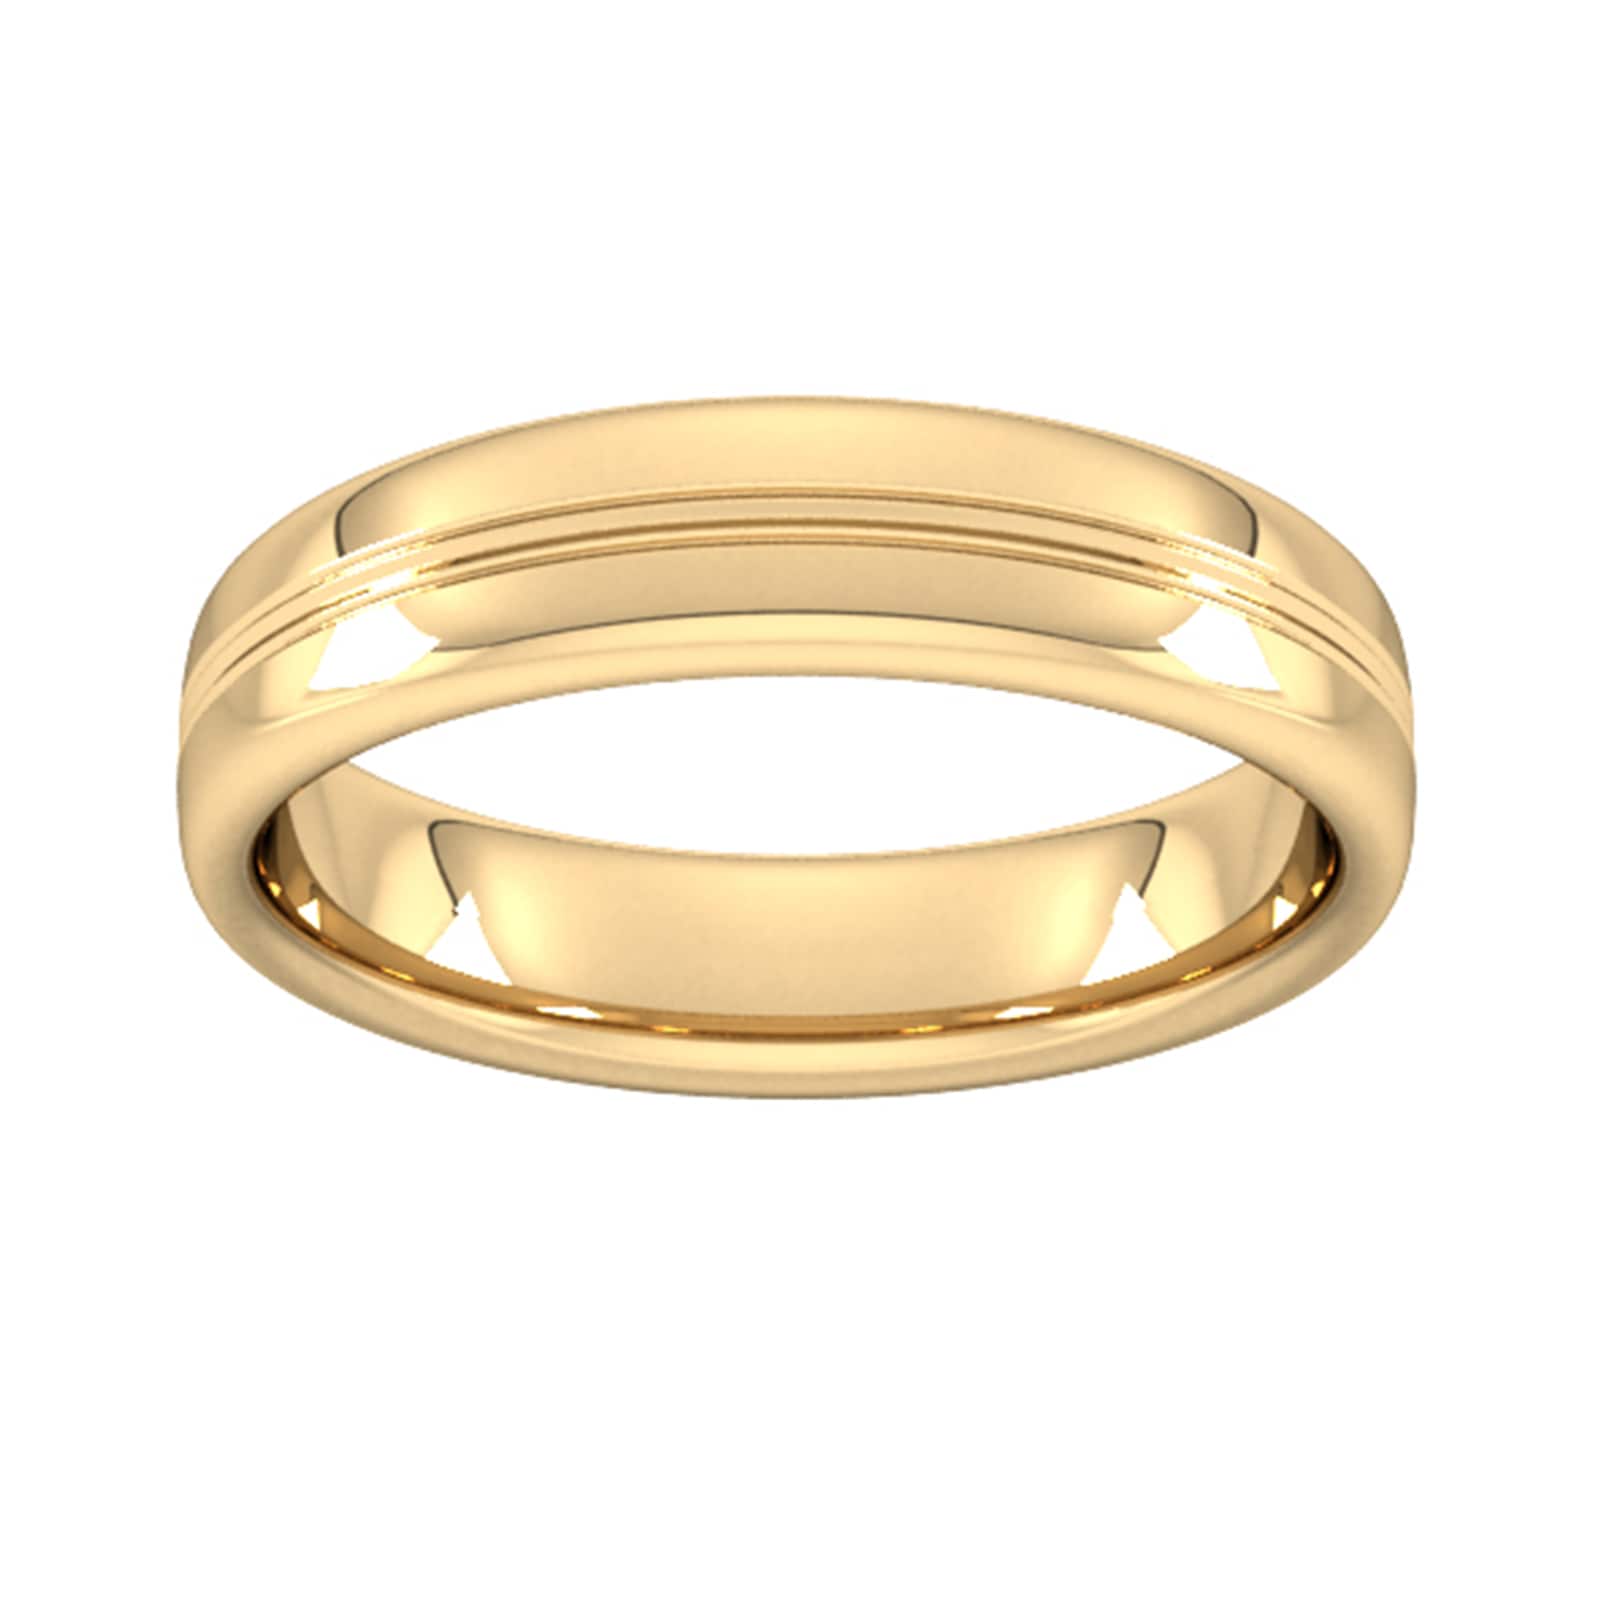 5mm Slight Court Heavy Grooved Polished Finish Wedding Ring In 18 Carat Yellow Gold - Ring Size L